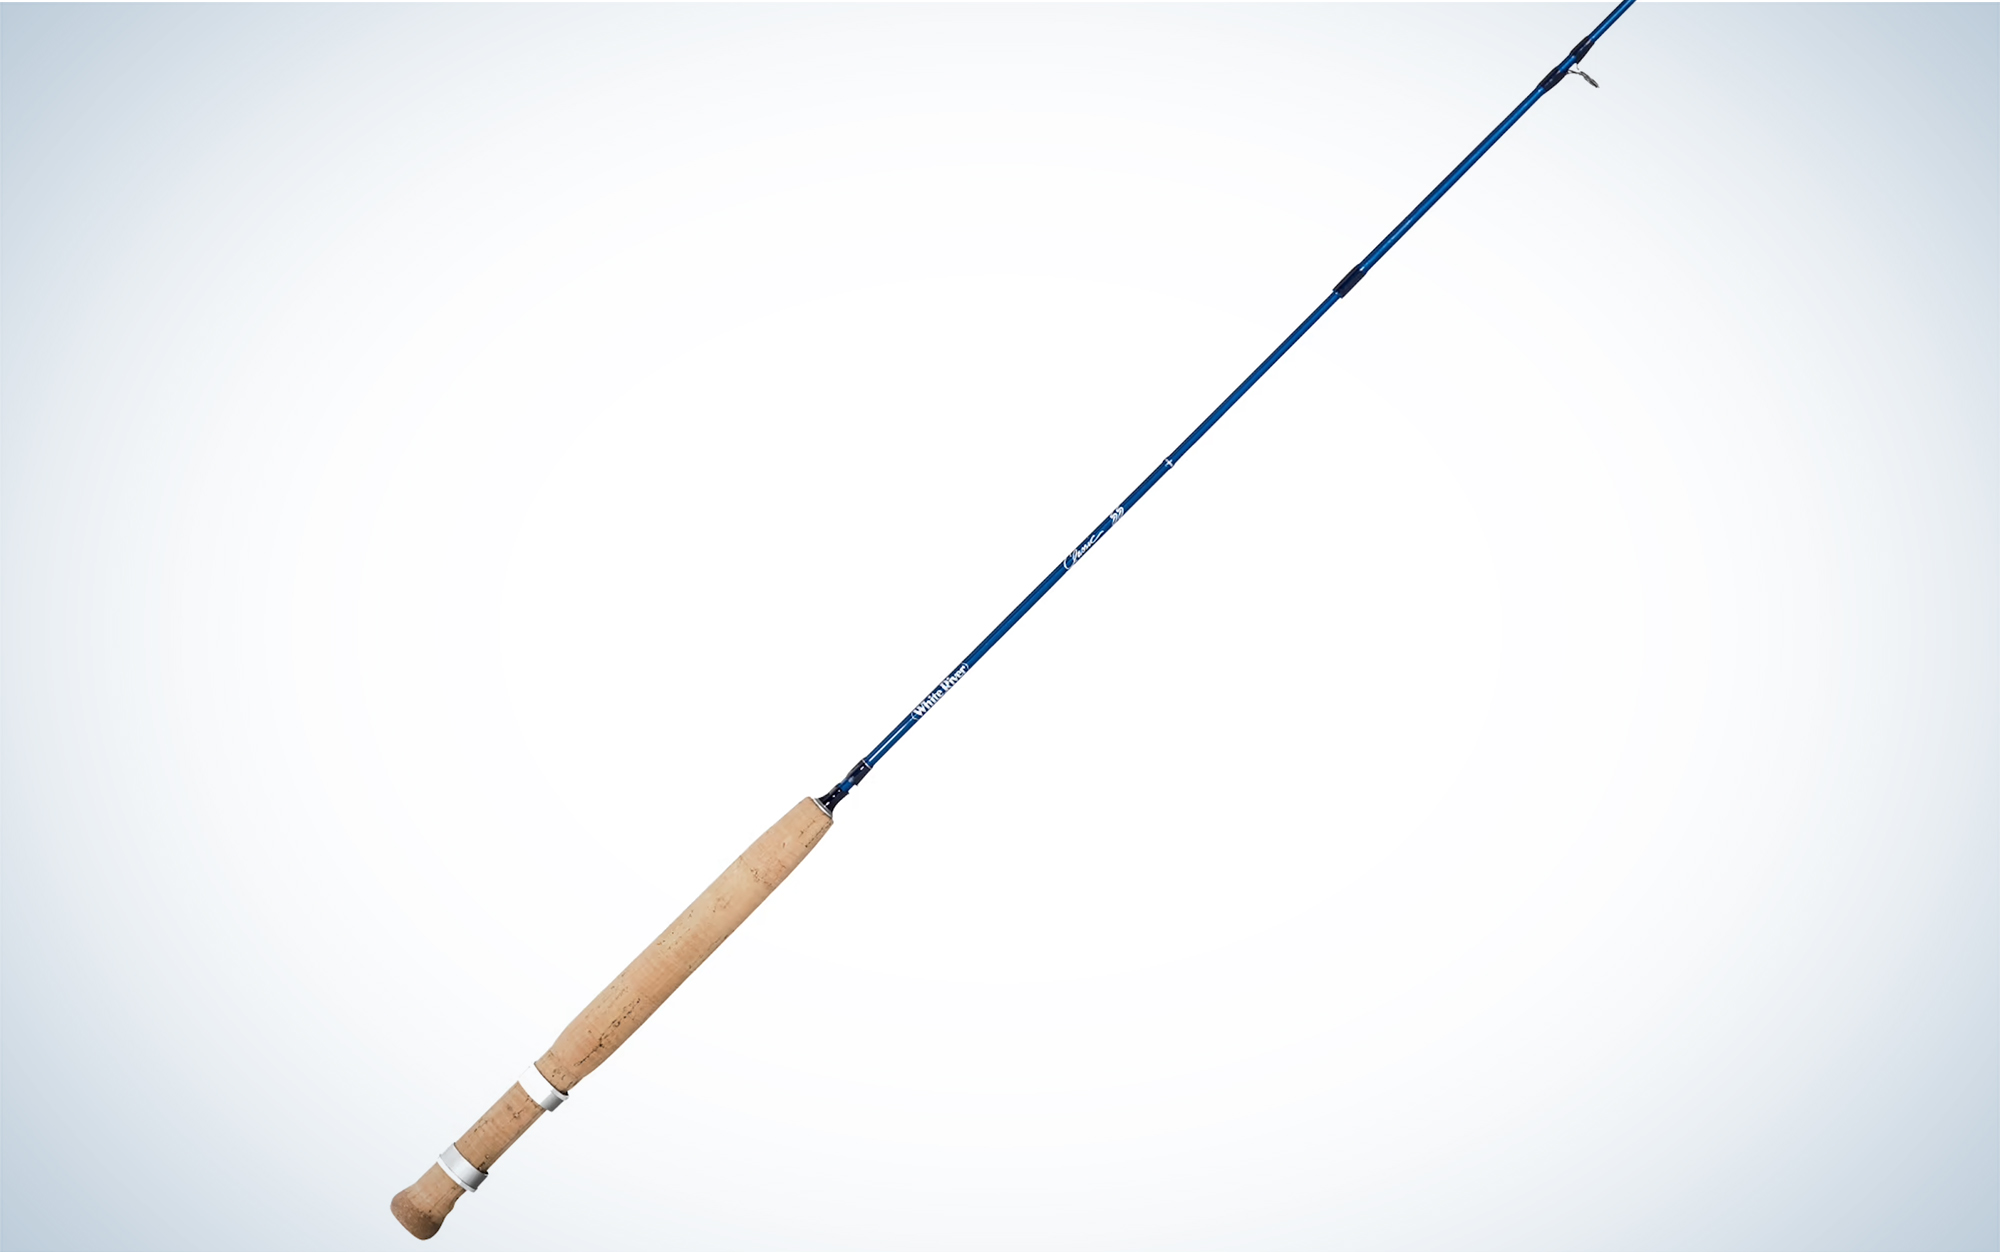 The White River Fly Shop Classic SS Fly Rod is best for carp.